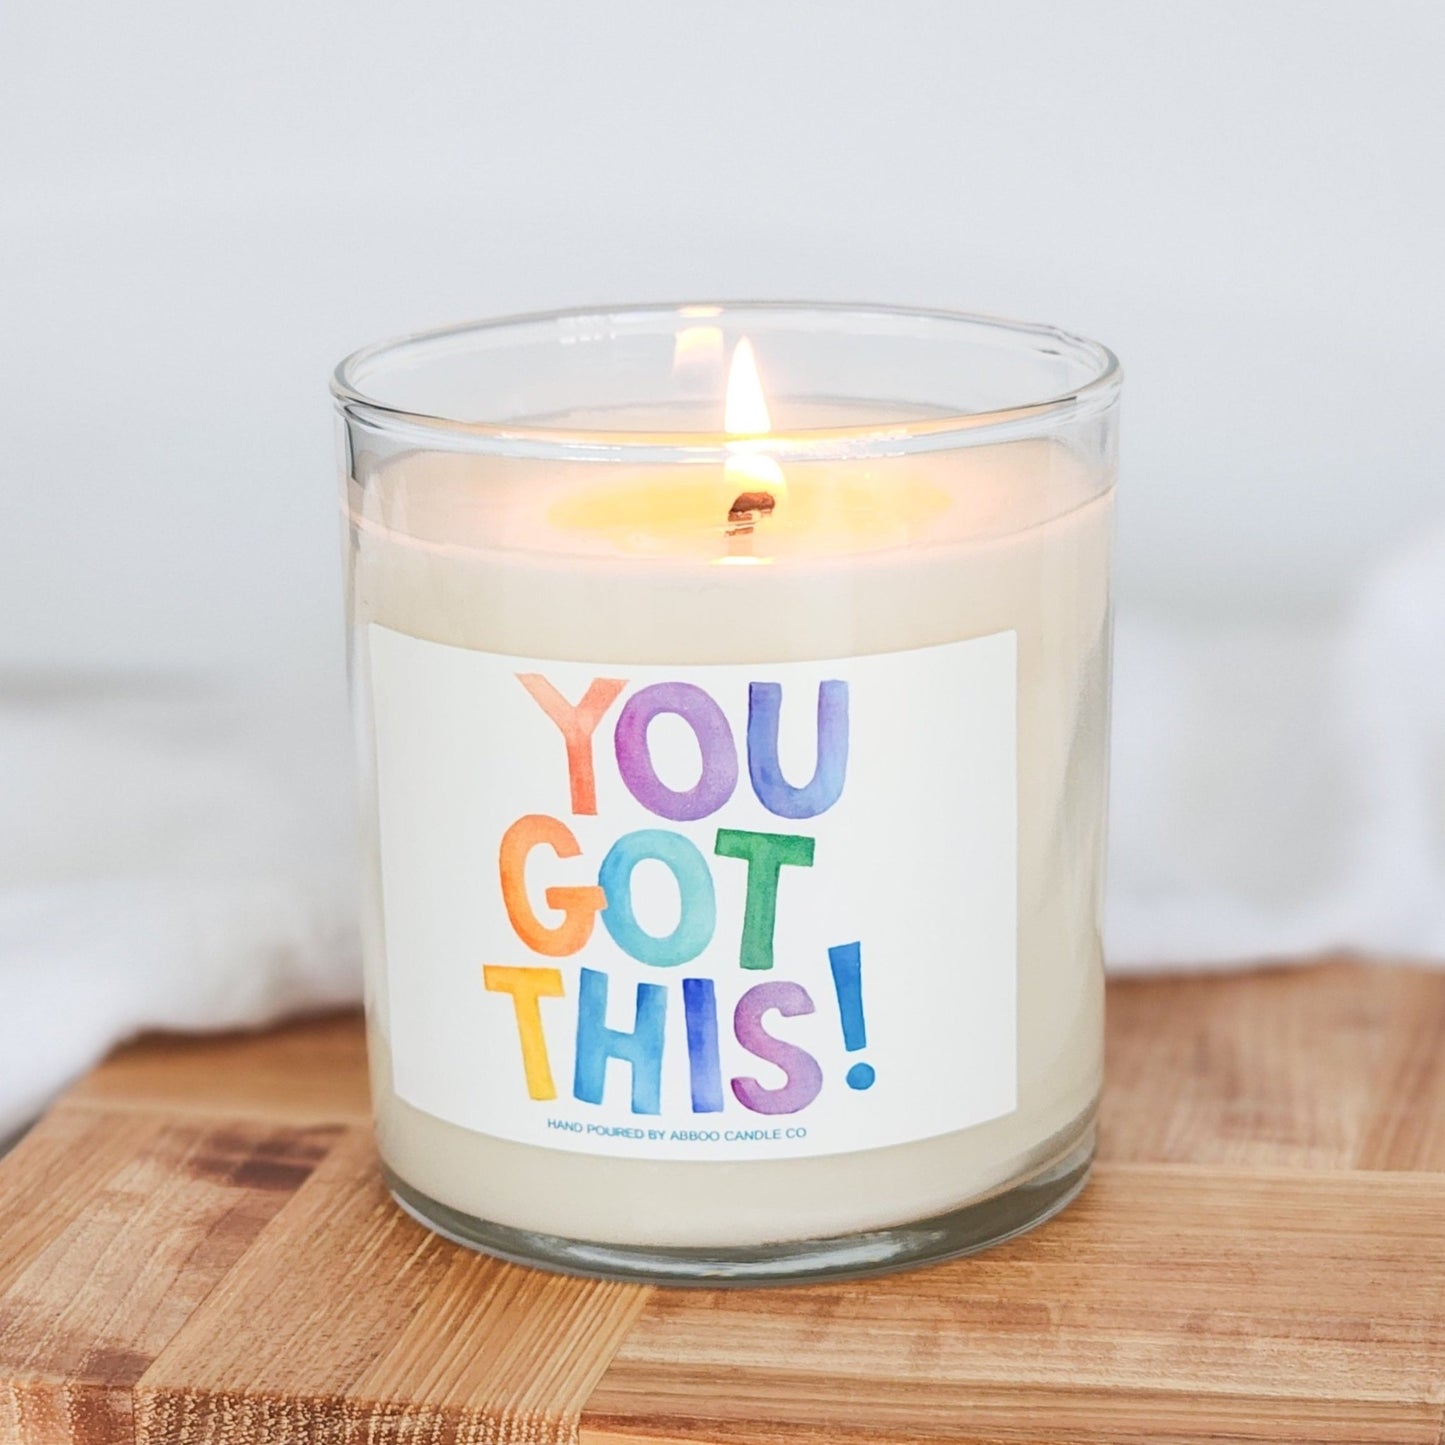 You Got This Soy Tumbler Candle - Abboo Candle Co